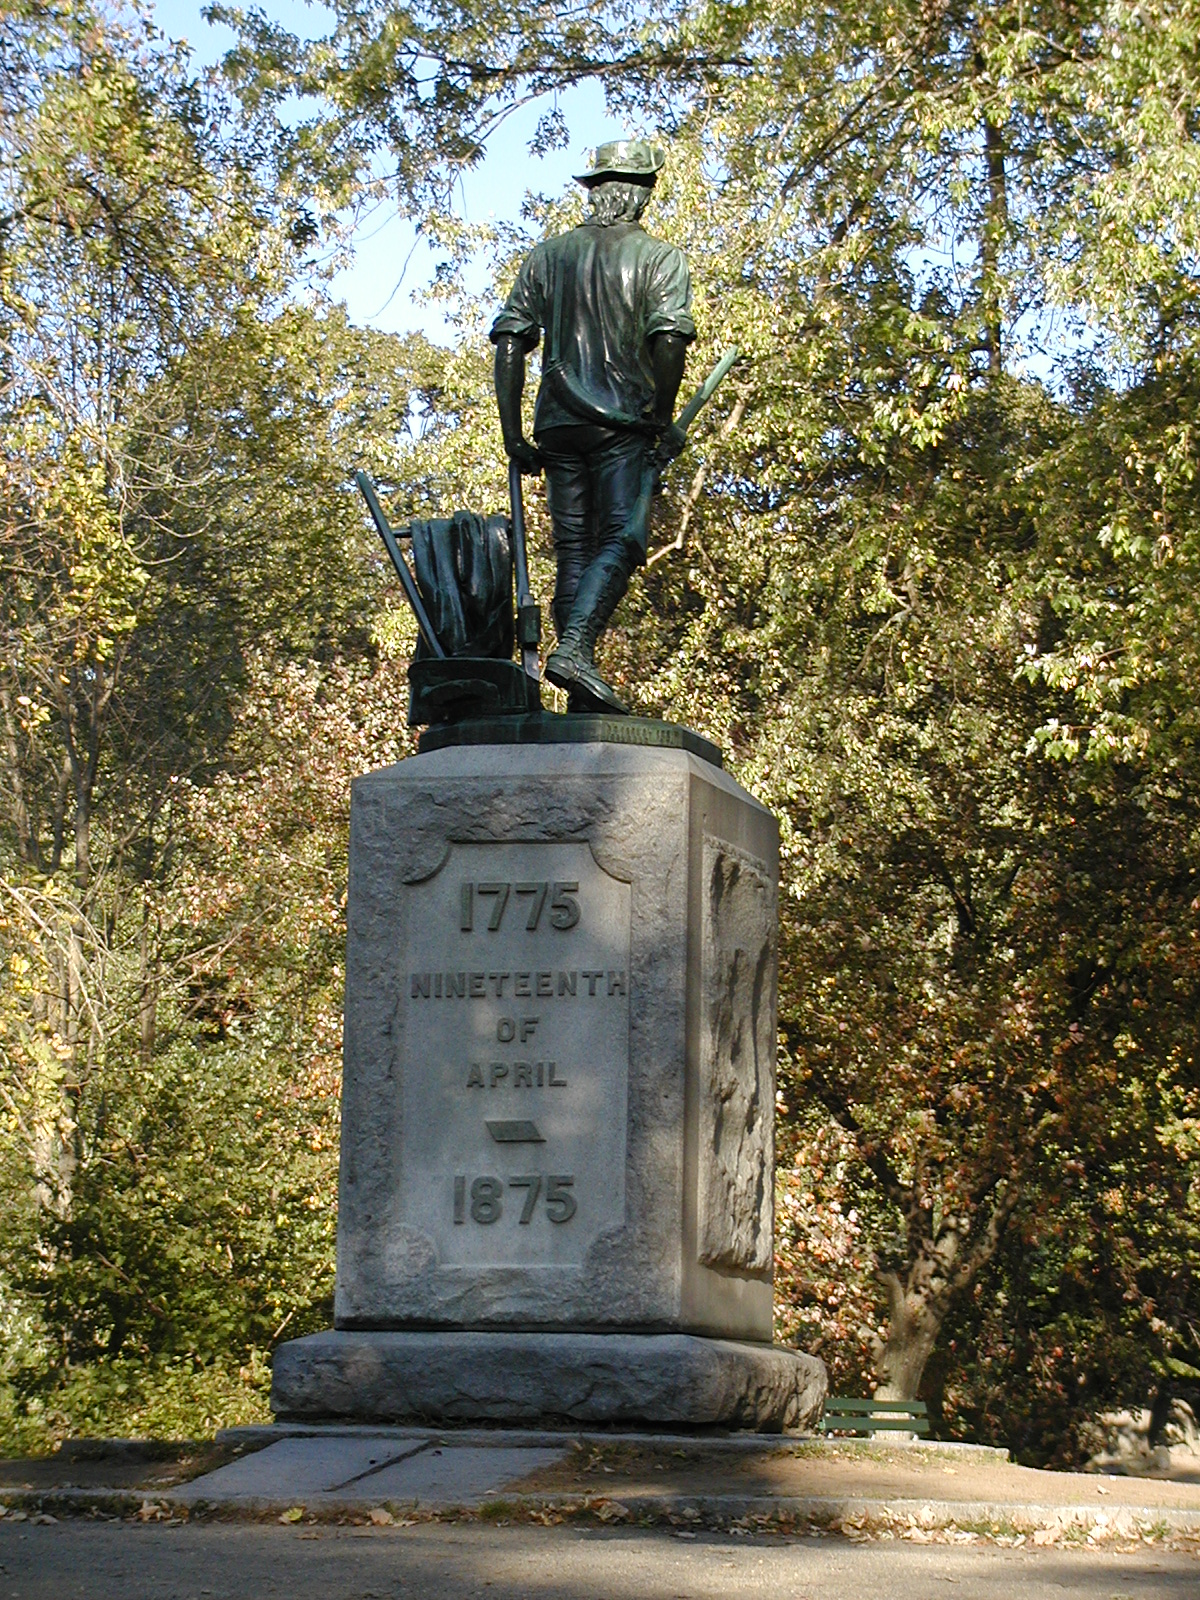 Back of the minuteman statue